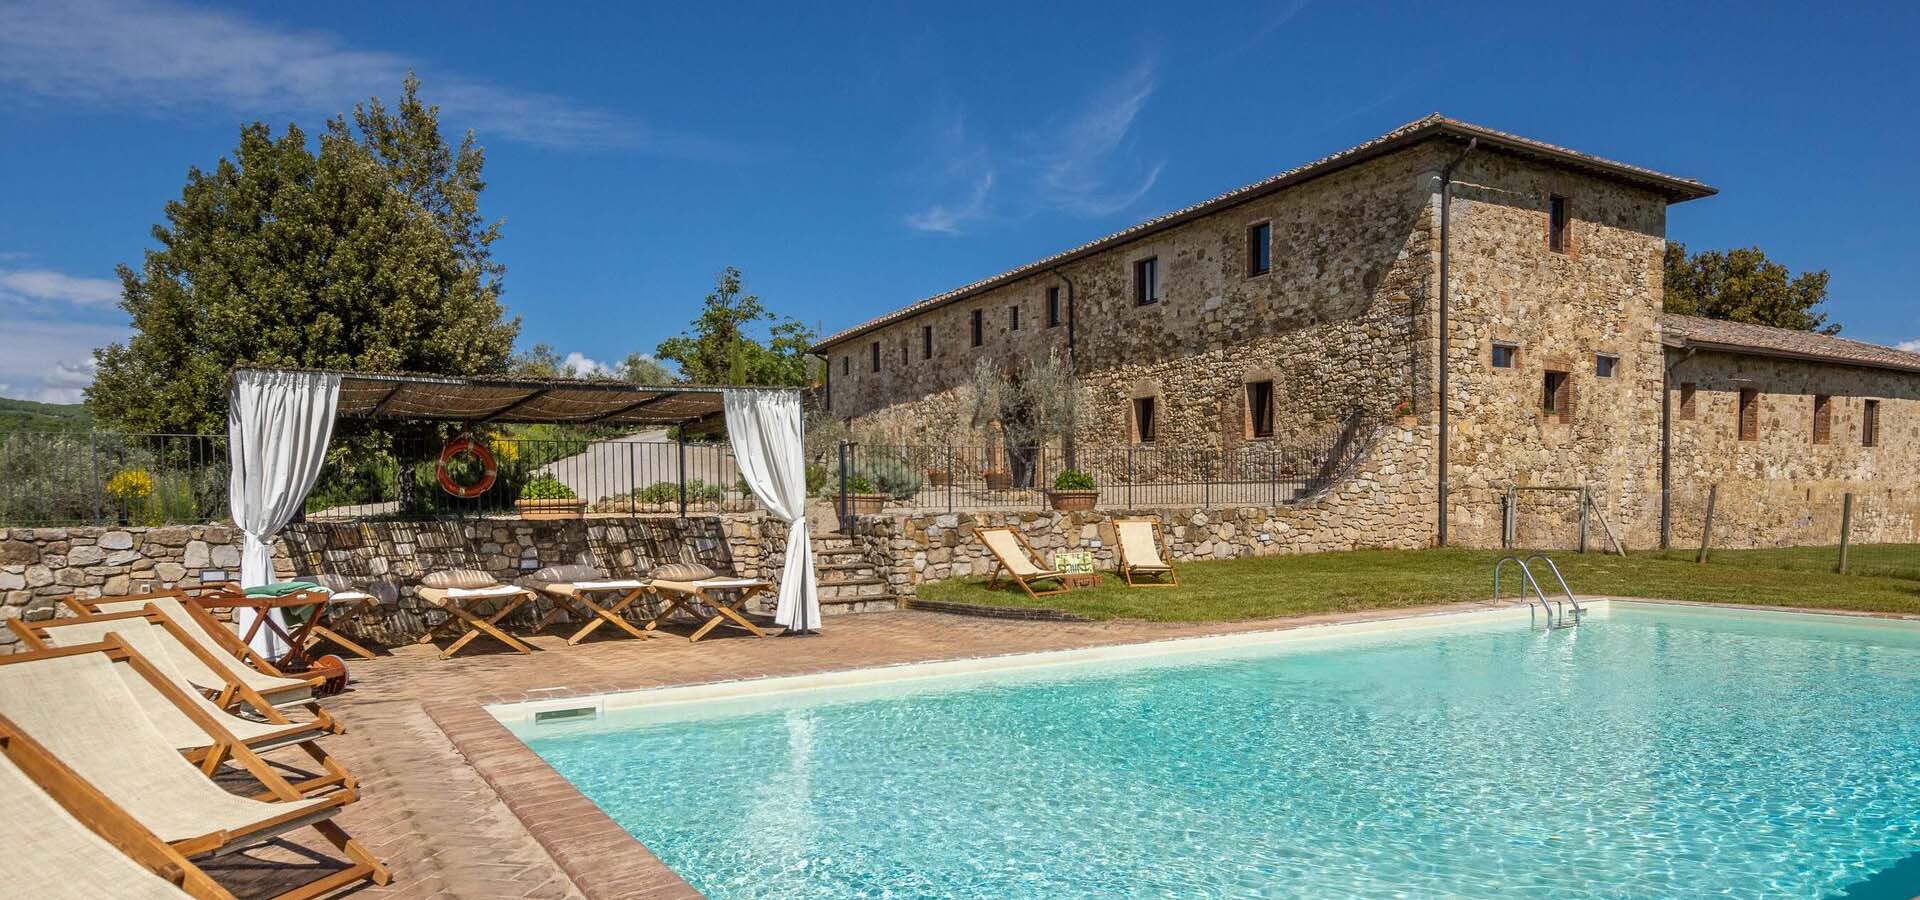 Villas-in-Tuscany-with-pool